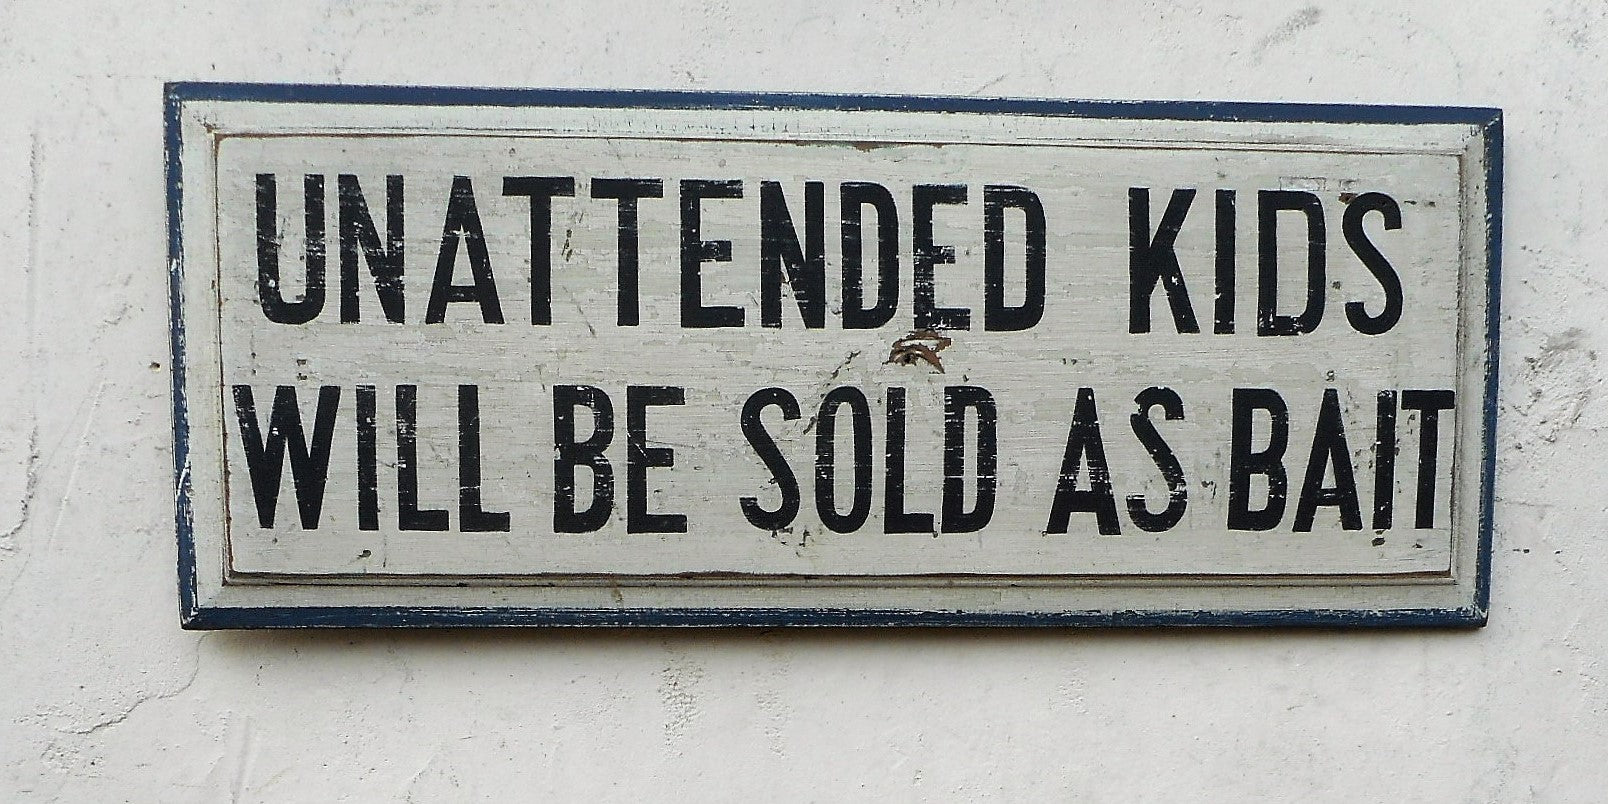 "Unattended Kids" sign